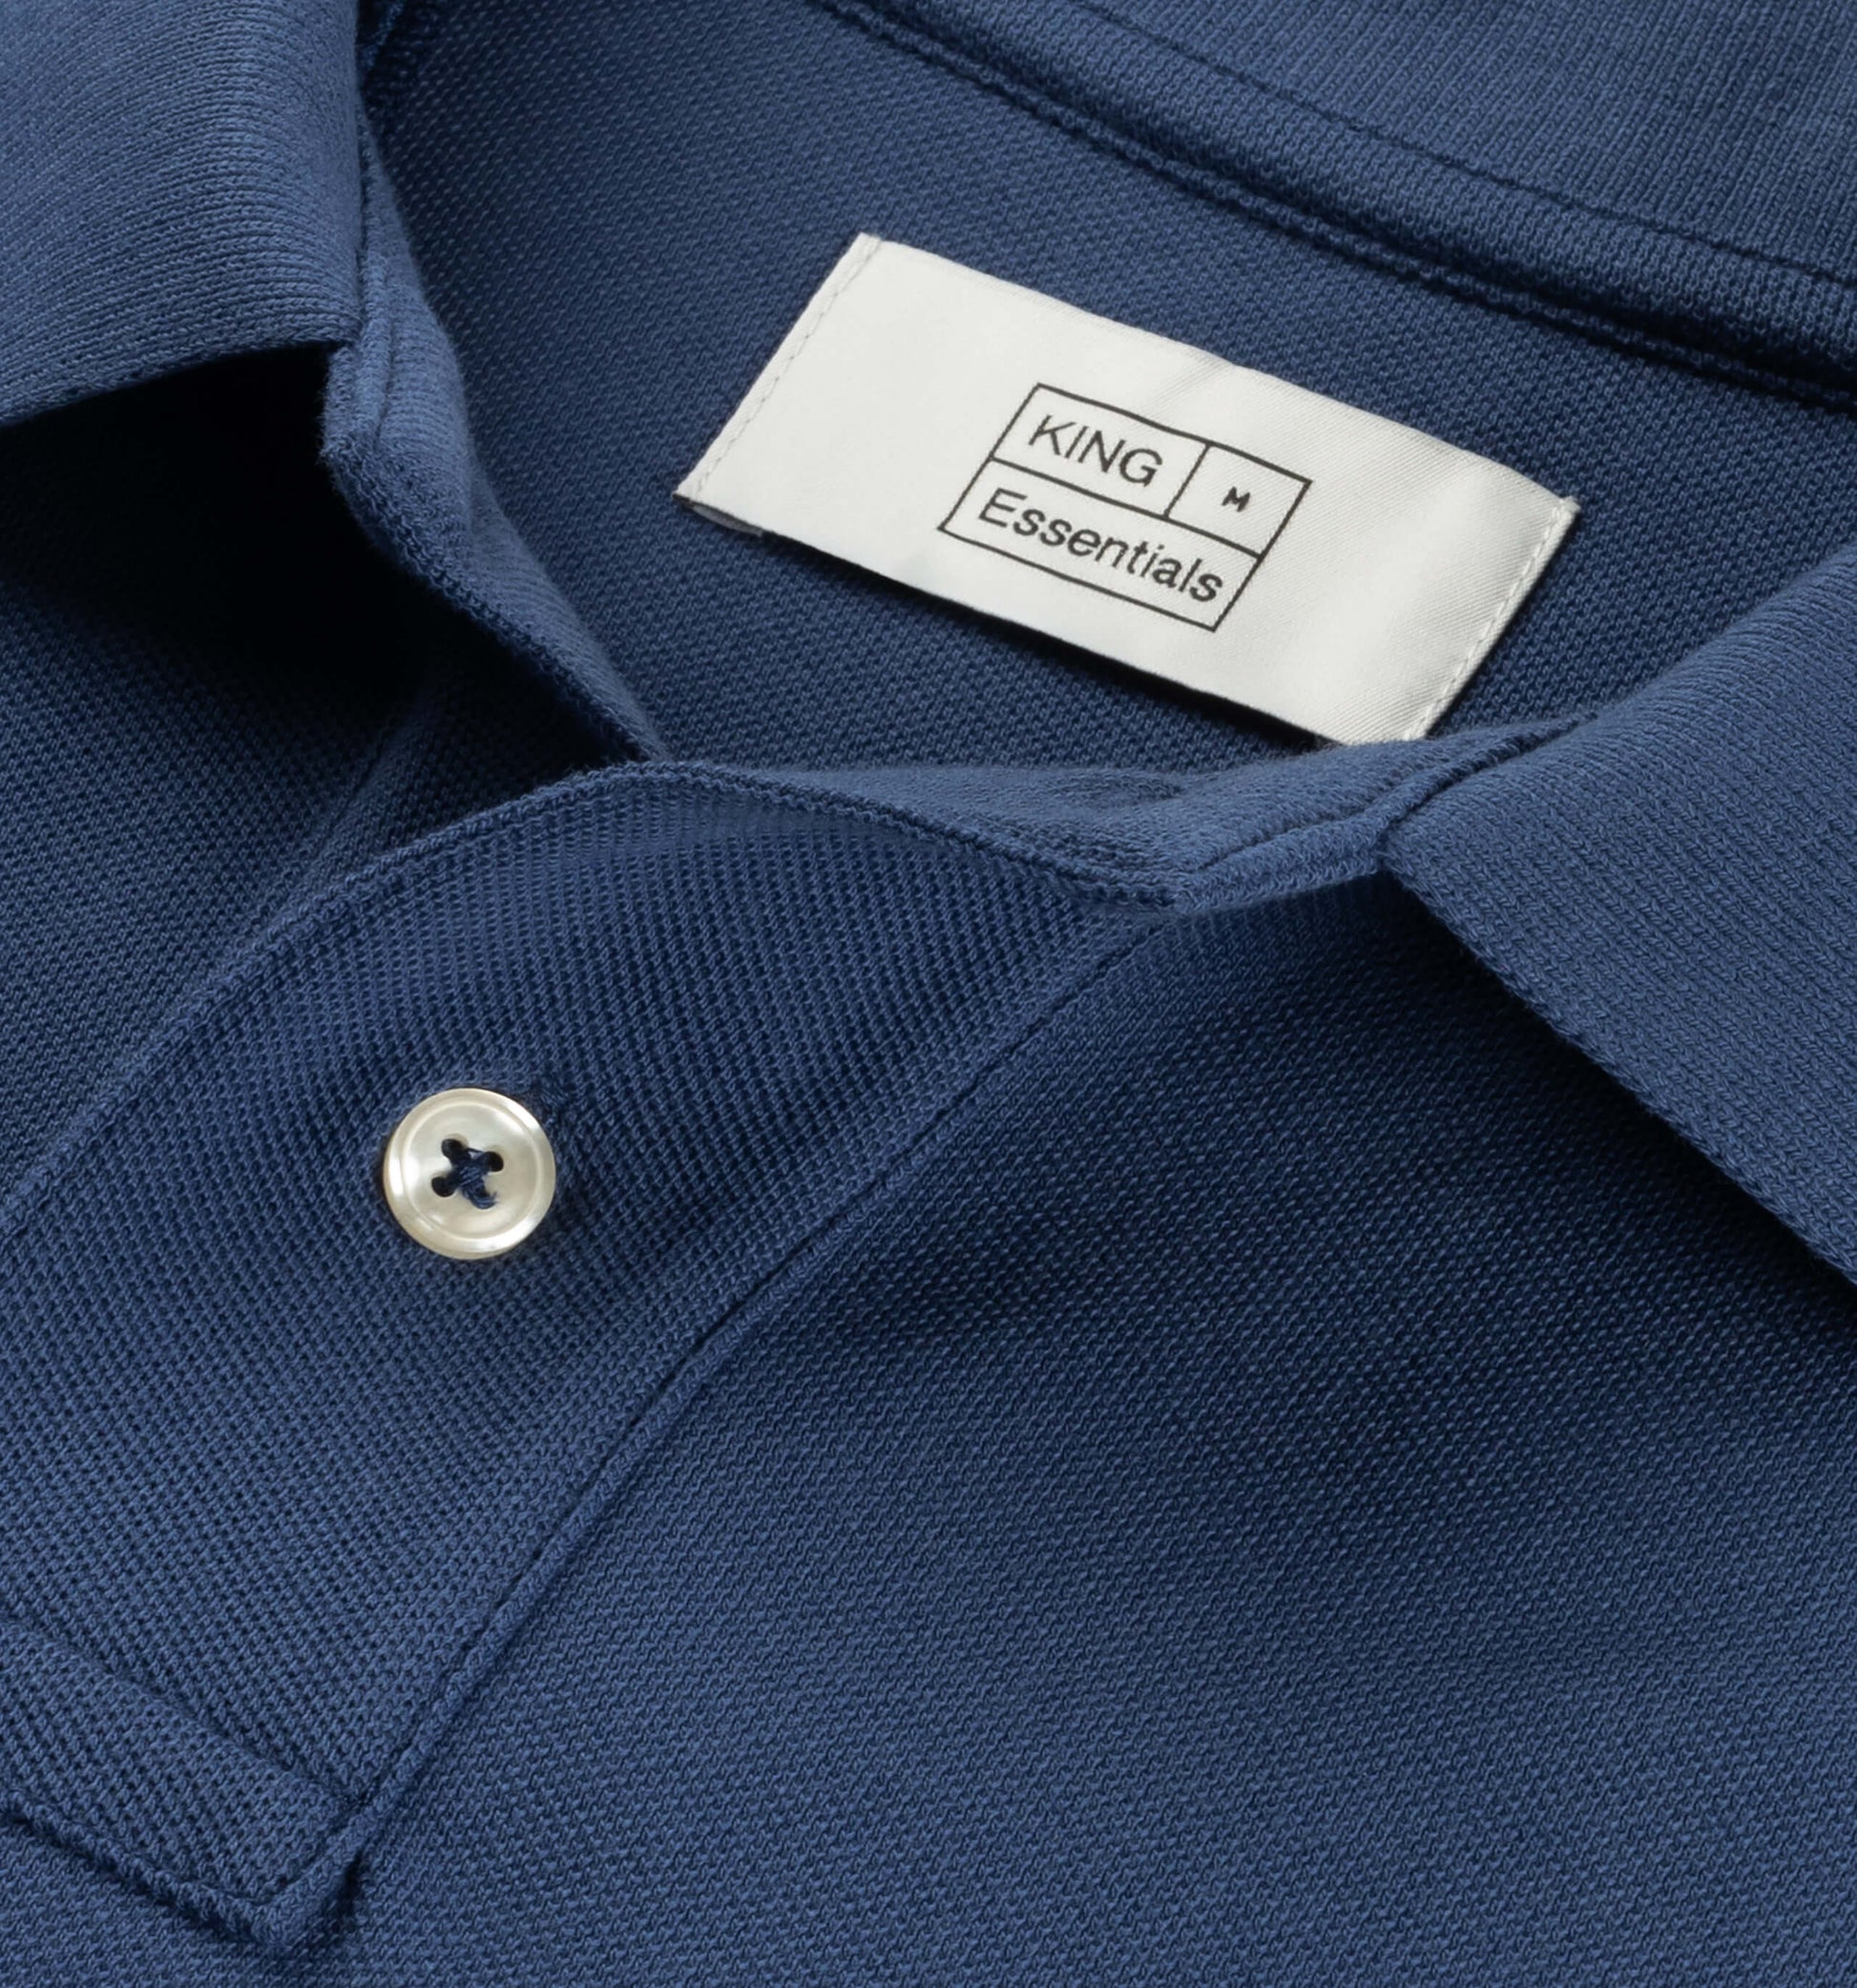 The Rene - Pique Polo In Indigo From King Essentials